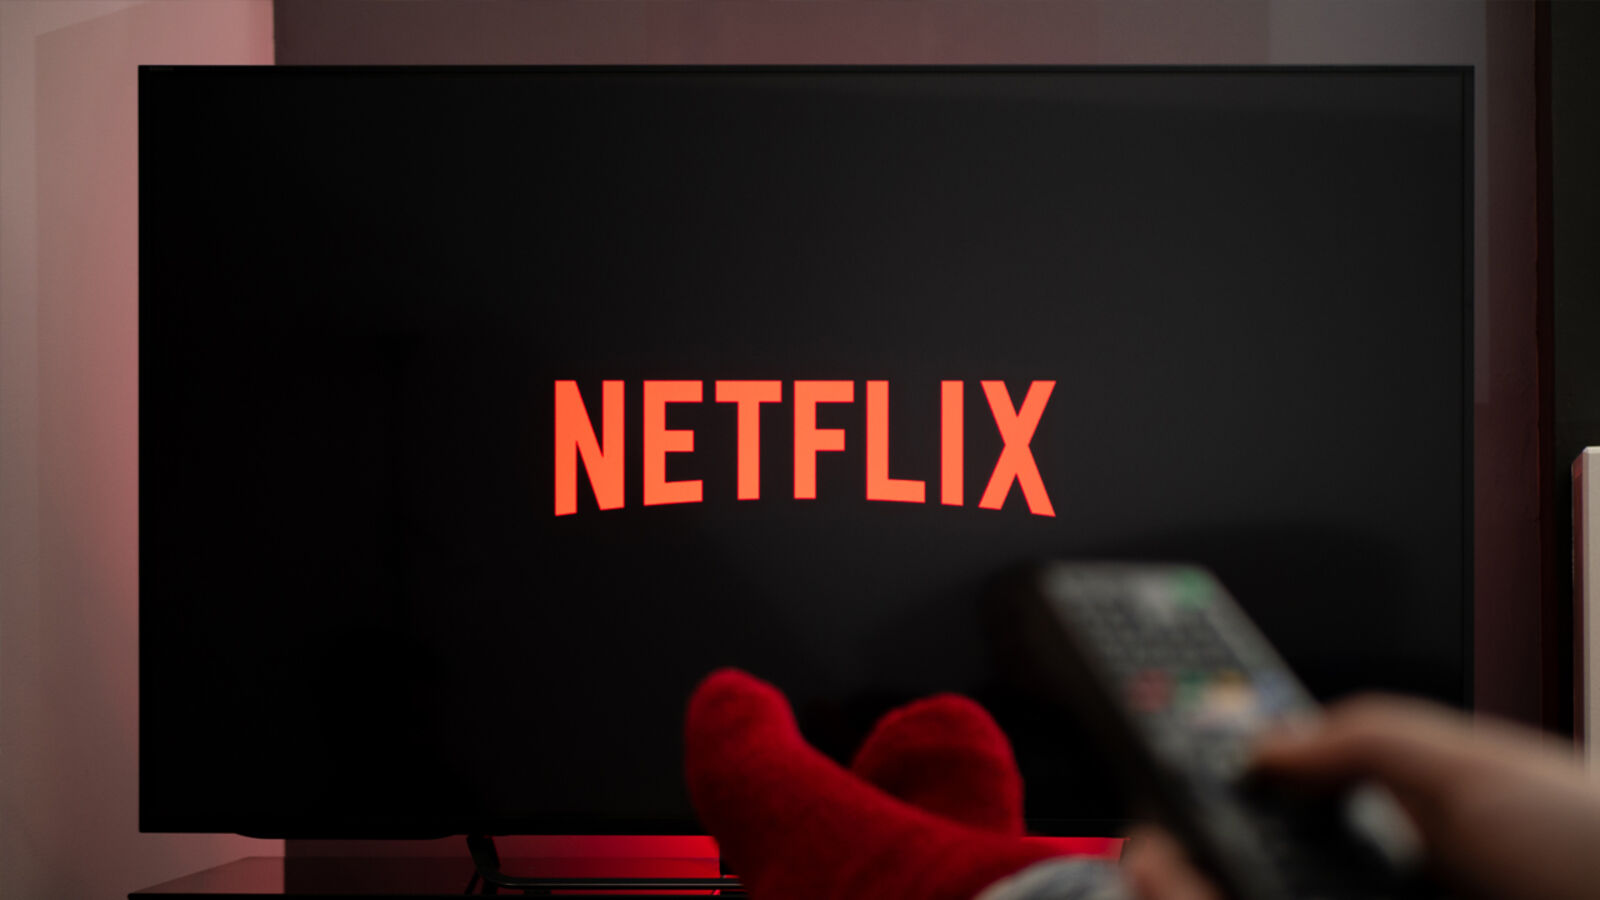 Netflix may run ads as early as 2022